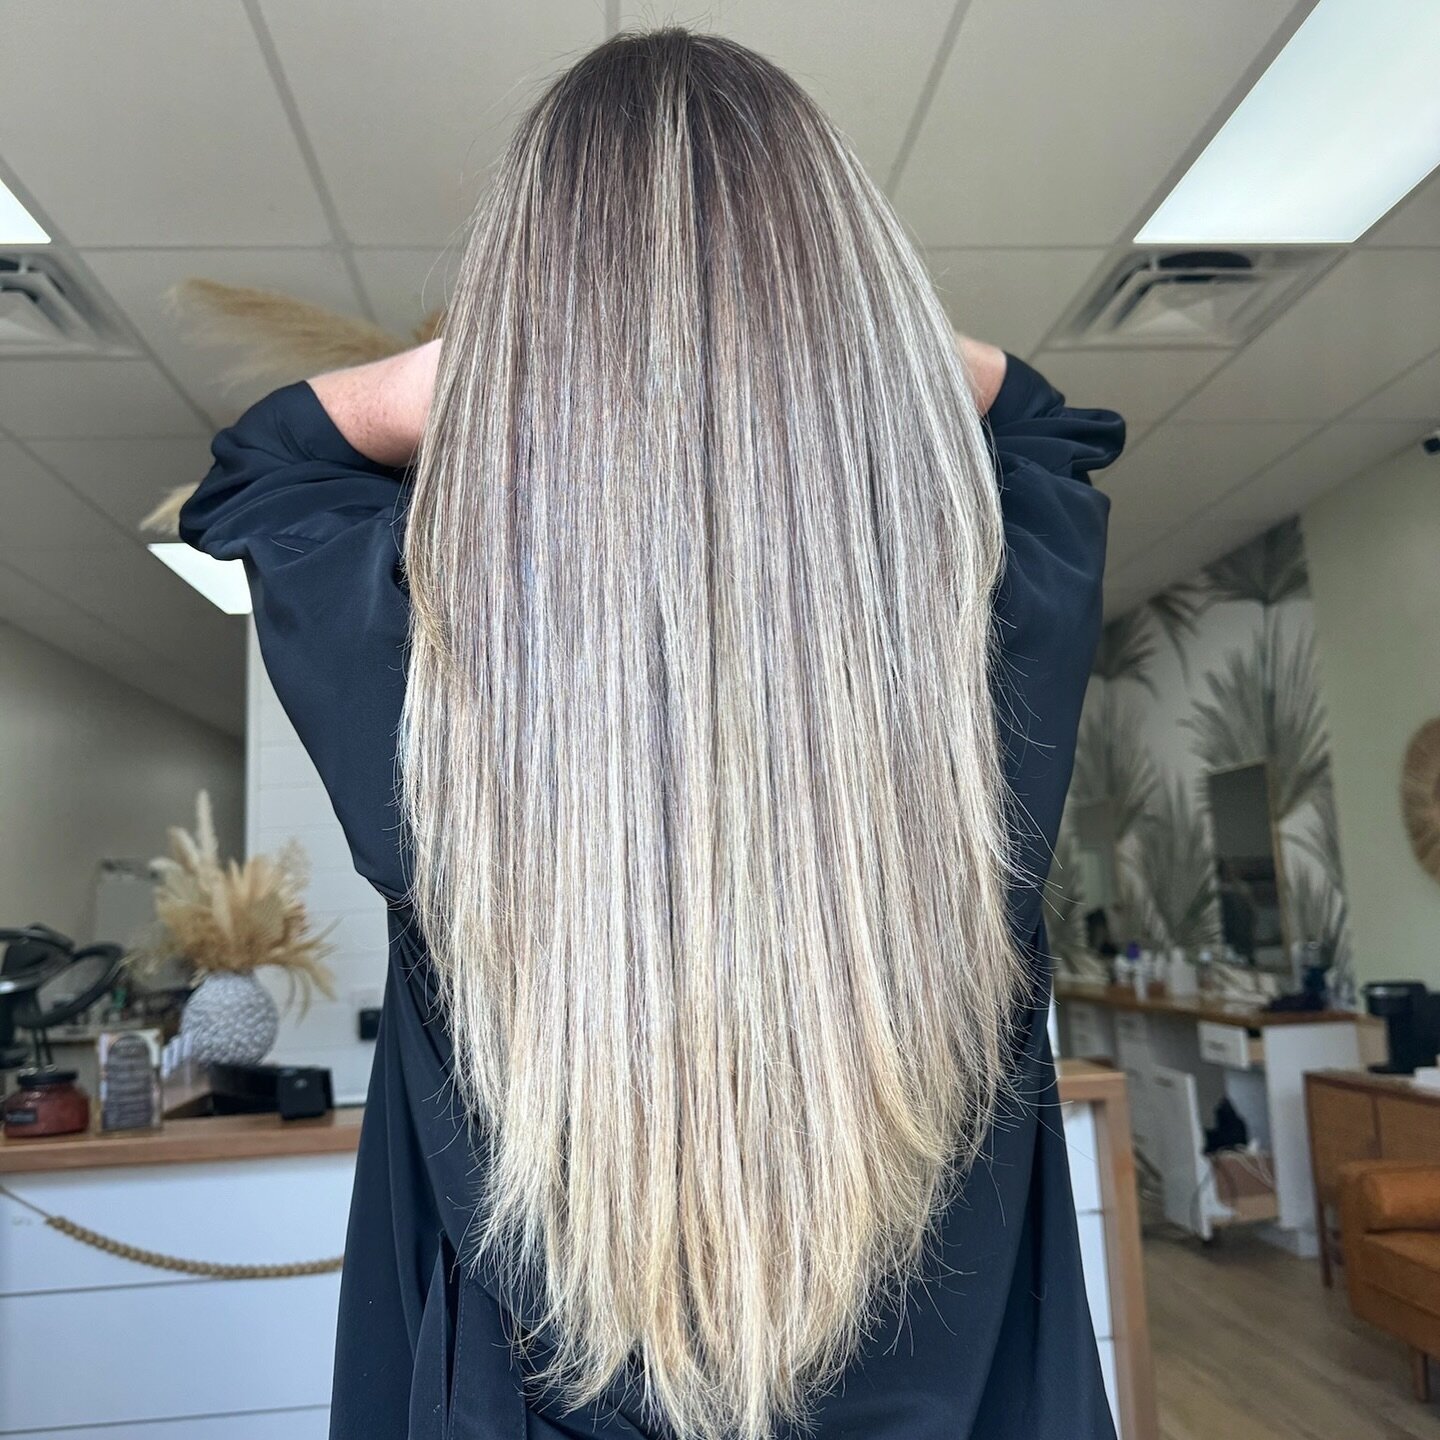 At Sunkissed Hair Loft, it&rsquo;s all about the seamless grow out for both color and extensions.

We understand that every individual&rsquo;s hair journey is unique, influenced by factors like natural hair color, dimension, texture, and more. 

Our 